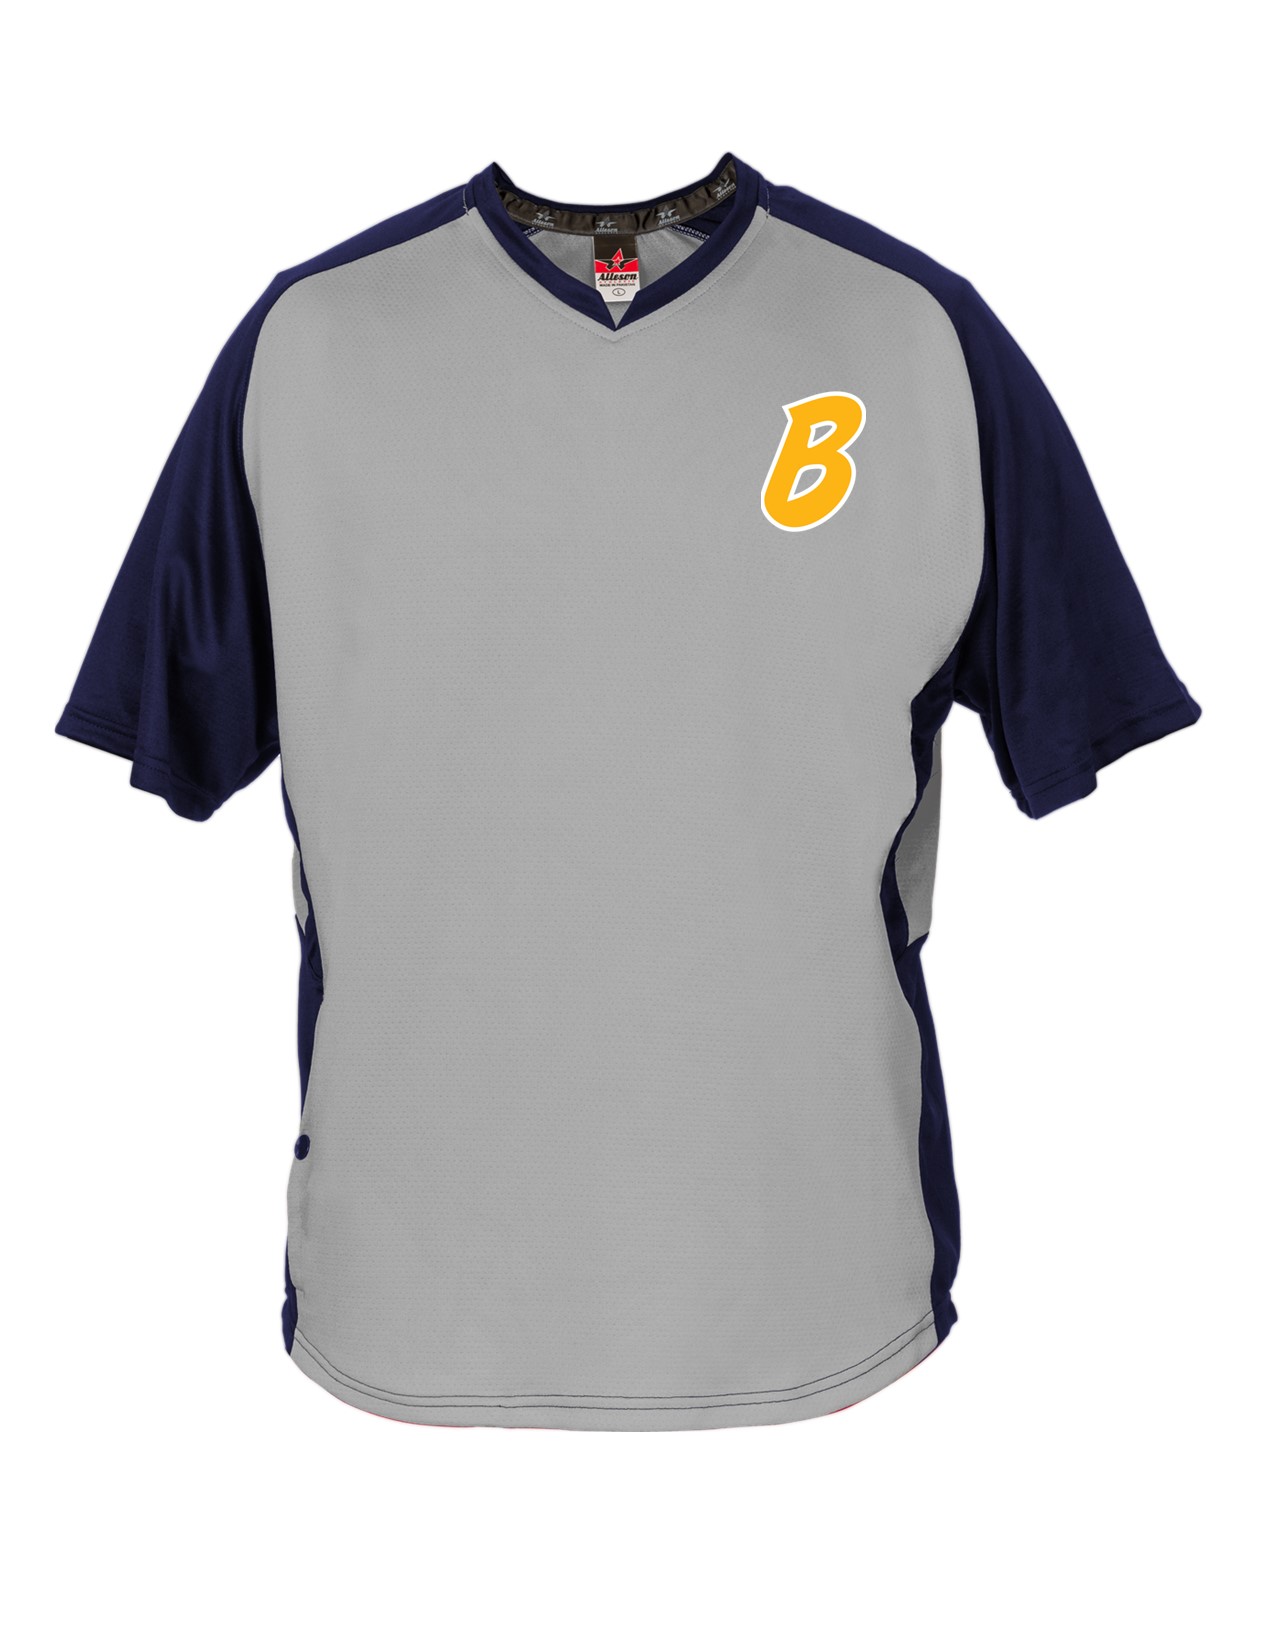 97 Badger 590BBLY Youth Cage Batter's Jacket with Embroidery